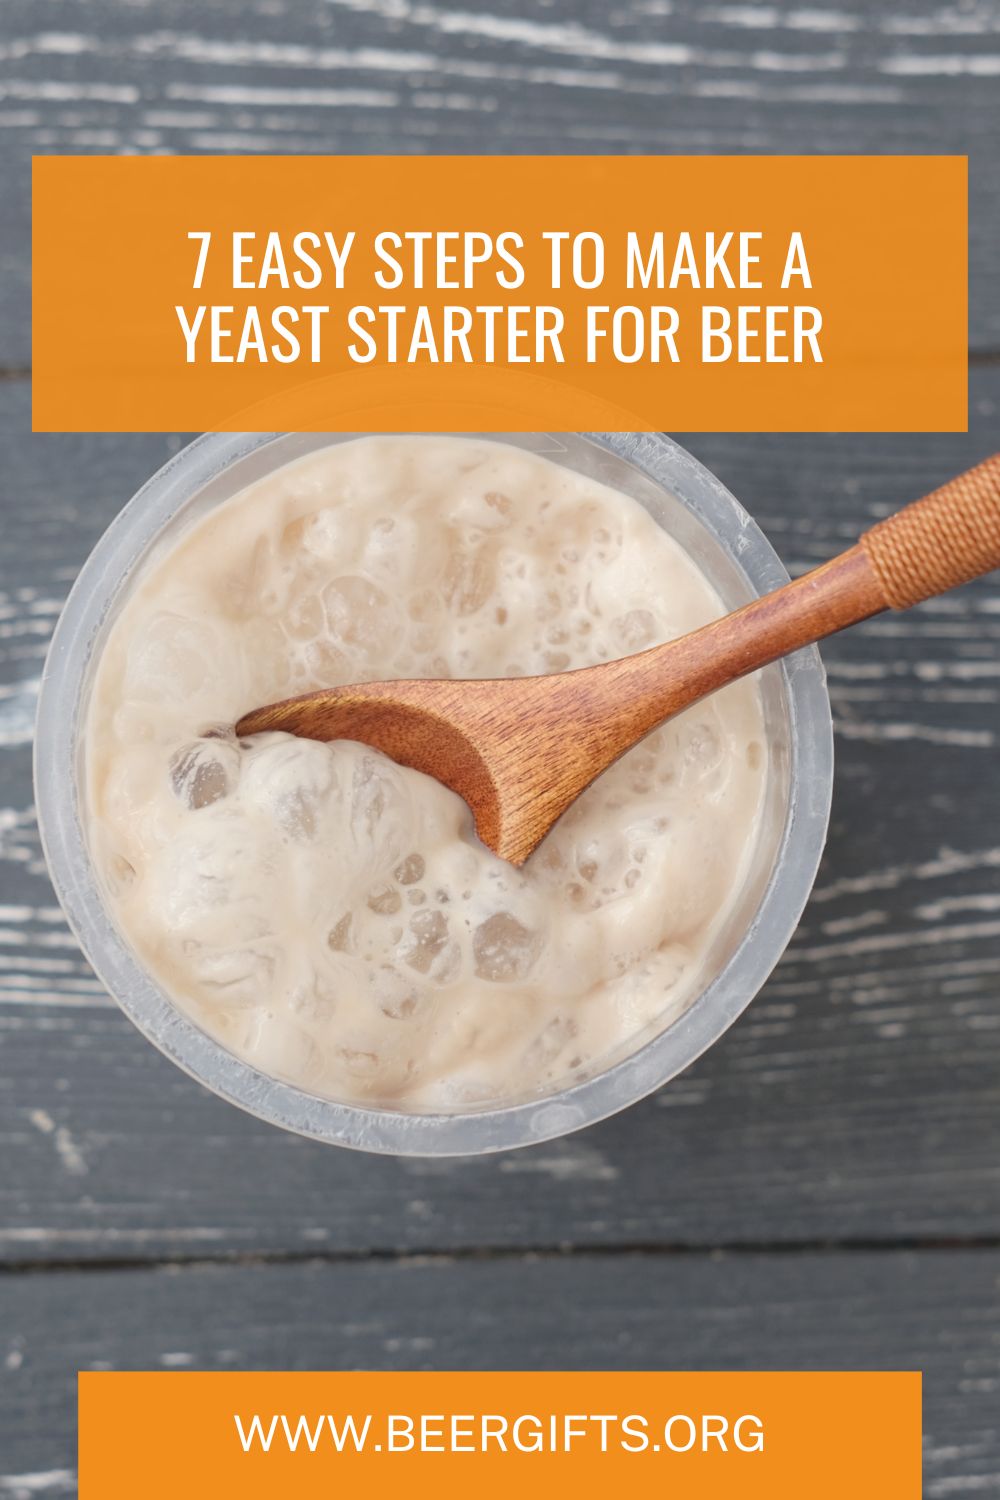 7 Easy Steps to Make a Yeast Starter for Beer1